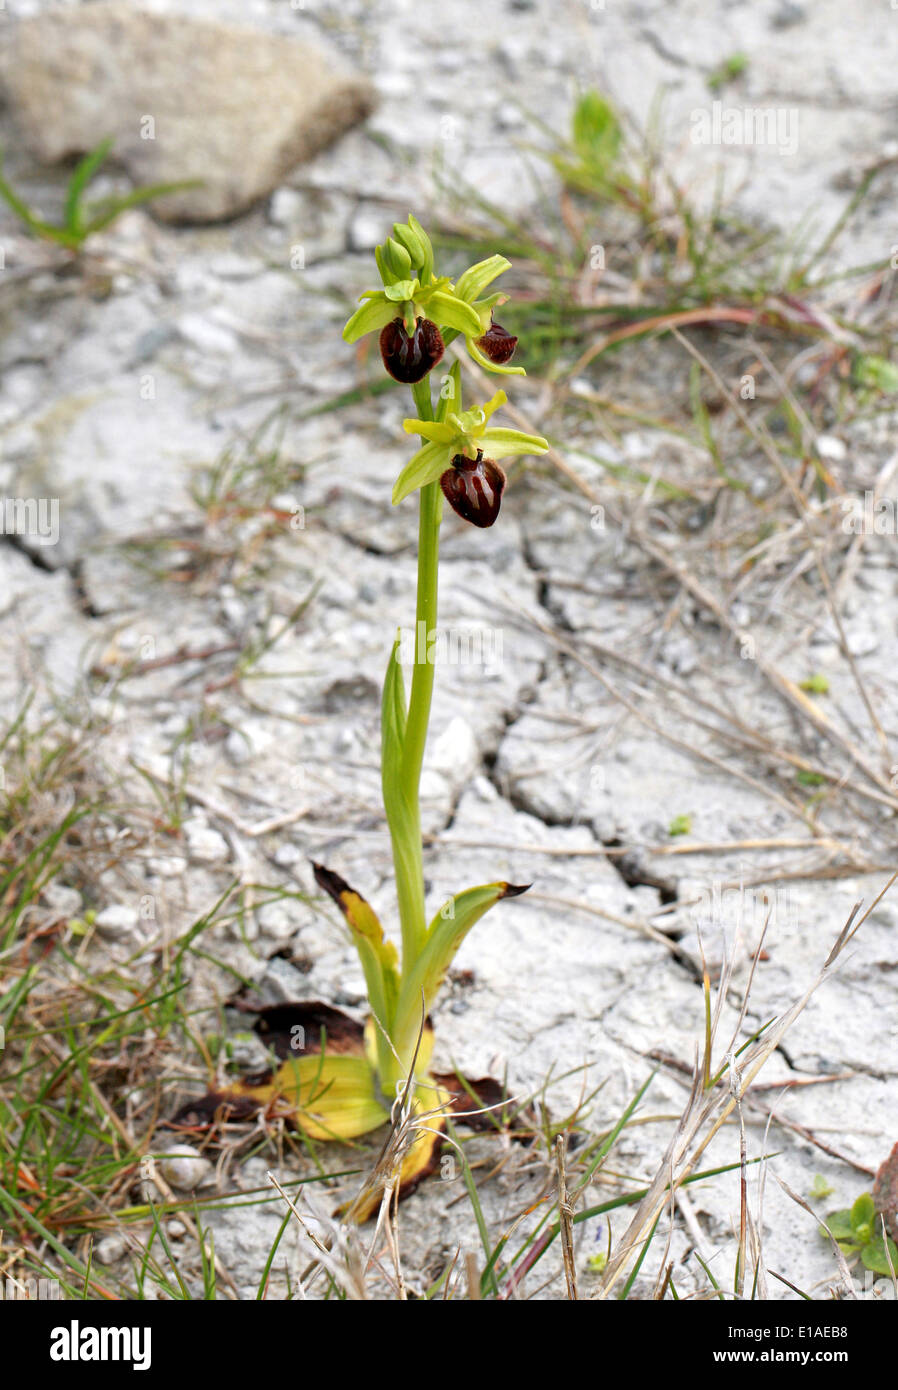 Early Spider Orchids, Ophrys sphegodes, Orchidaceae. Samphire Hoe, Kent. Stock Photo